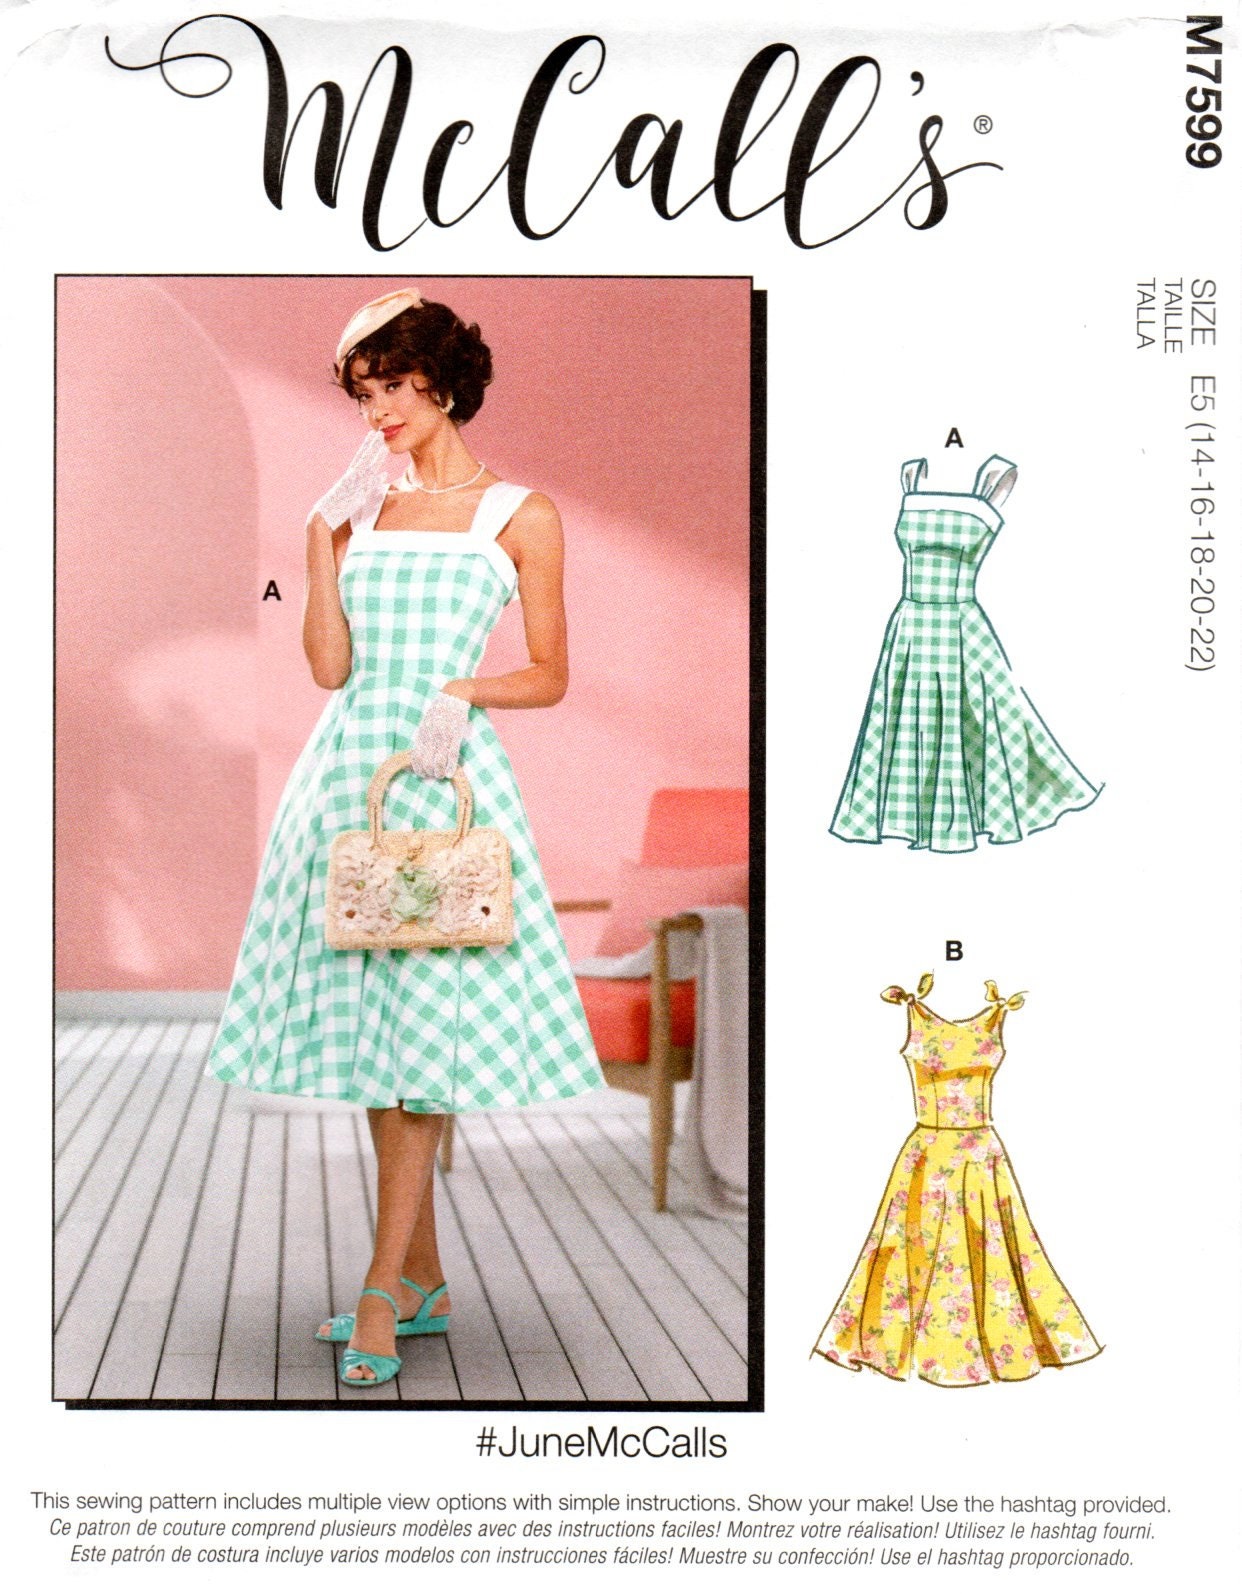 5 Dress Pattern Ideas for the Summer - The Shapes of Fabric